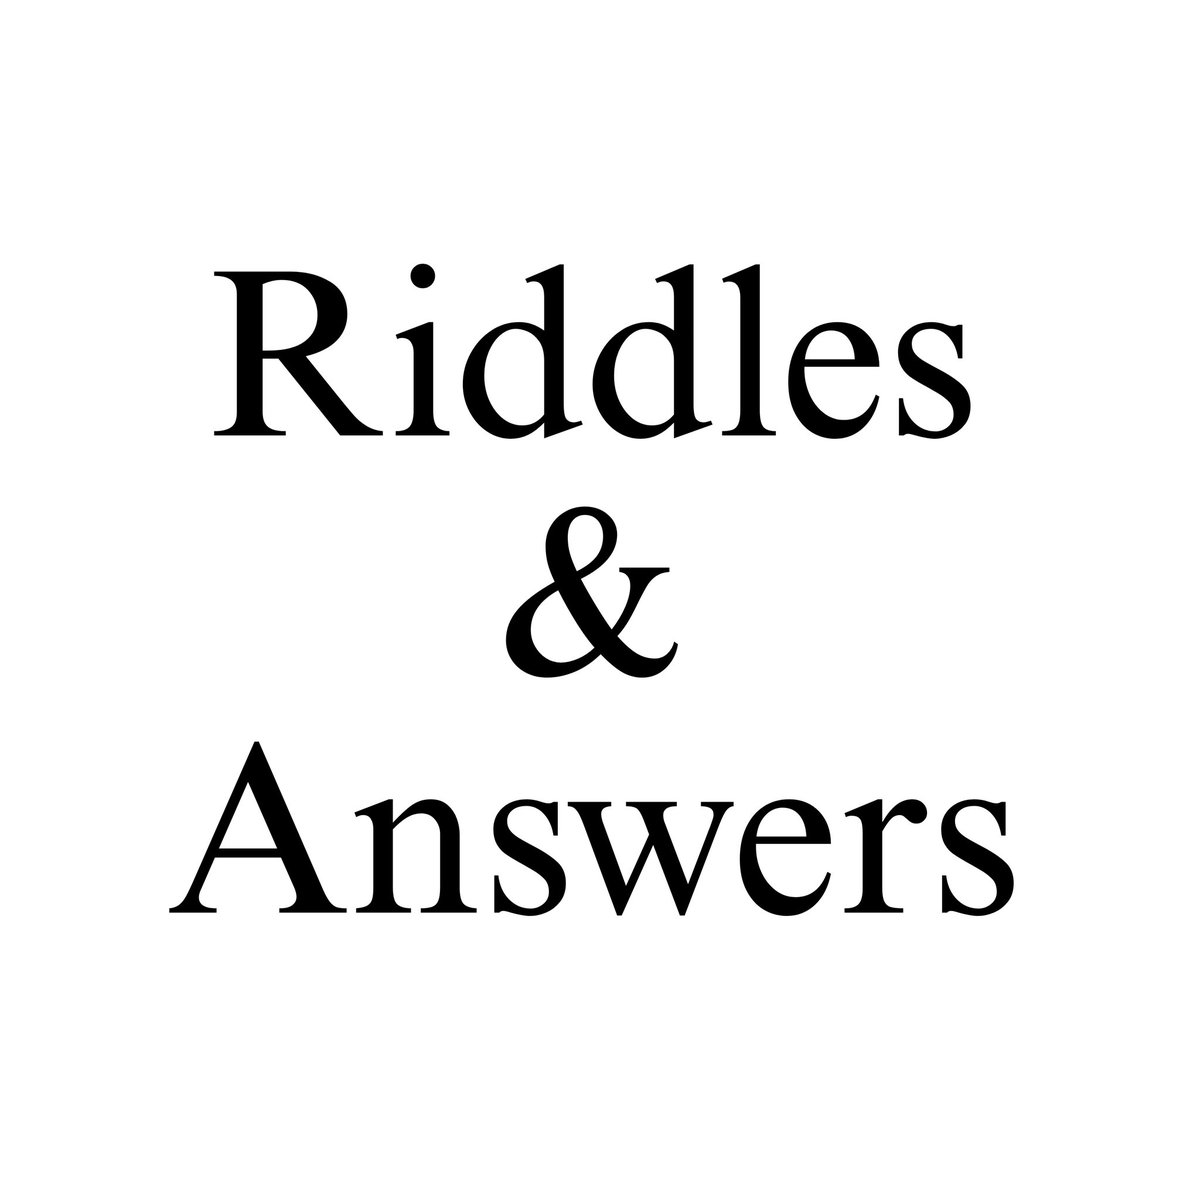 A thread of all the riddles I've dropped so far and their answers.